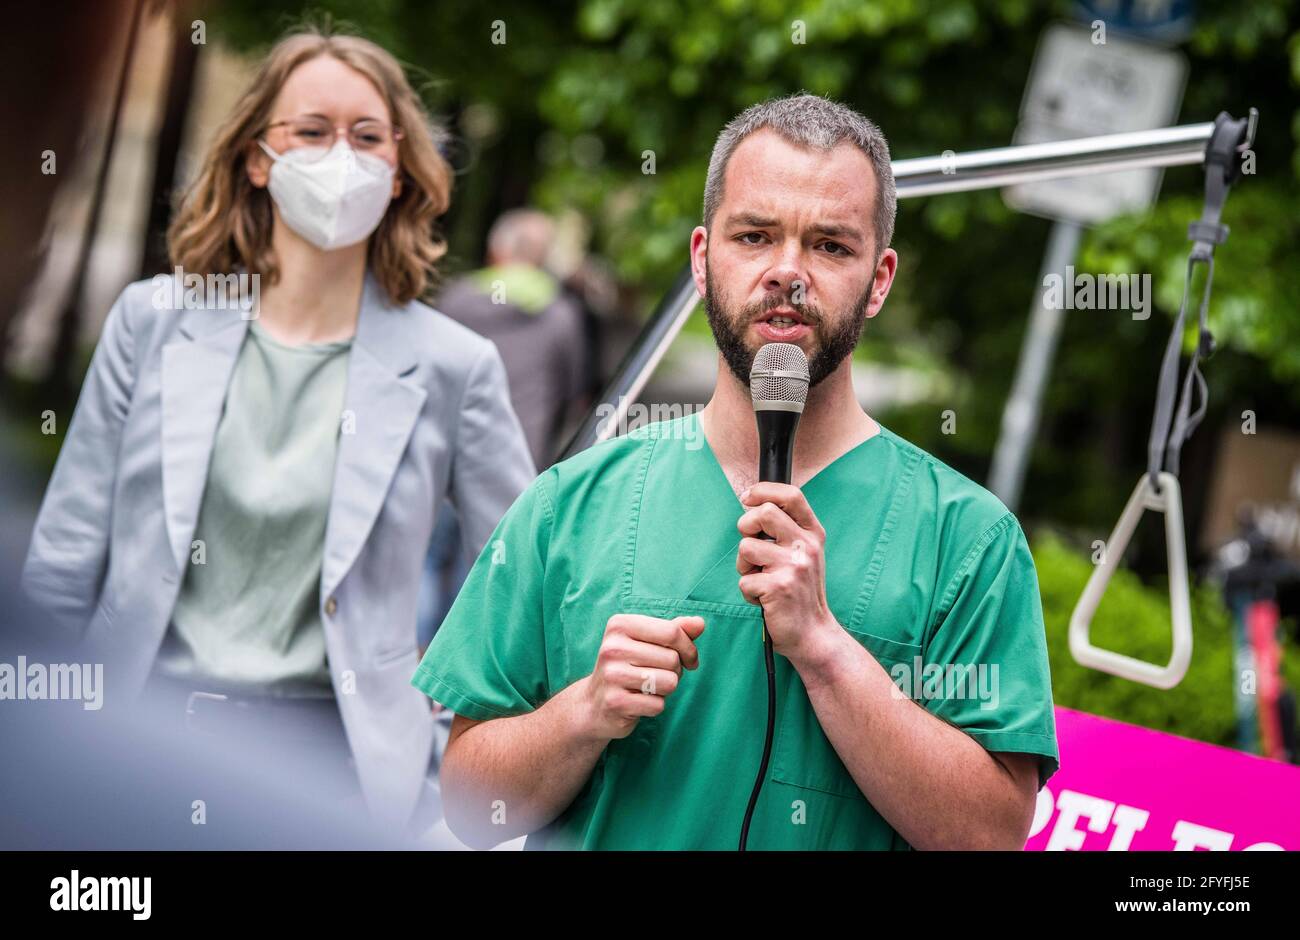 Munich, Bavaria, Germany. 28th May, 2021. ANDREAS KAHL of the Bavarian Greens wearing his hospital scrubs Kahl works in an Intensive Care Unit in Murnau and detailed the poor treatment of the healthcare workers by the Bavarian government that promotes overwork, poorer care quality, and burnout syndrome. The Bavarian Greens (die Gruenen/Buendnis90) organized a protest action at the Bavarian Staatskanzlei (government building) in support of healthcare workers. During the Coronavirus crisis, the working conditions for this sector have come into greater focus and The Greens are pushing for better Stock Photo